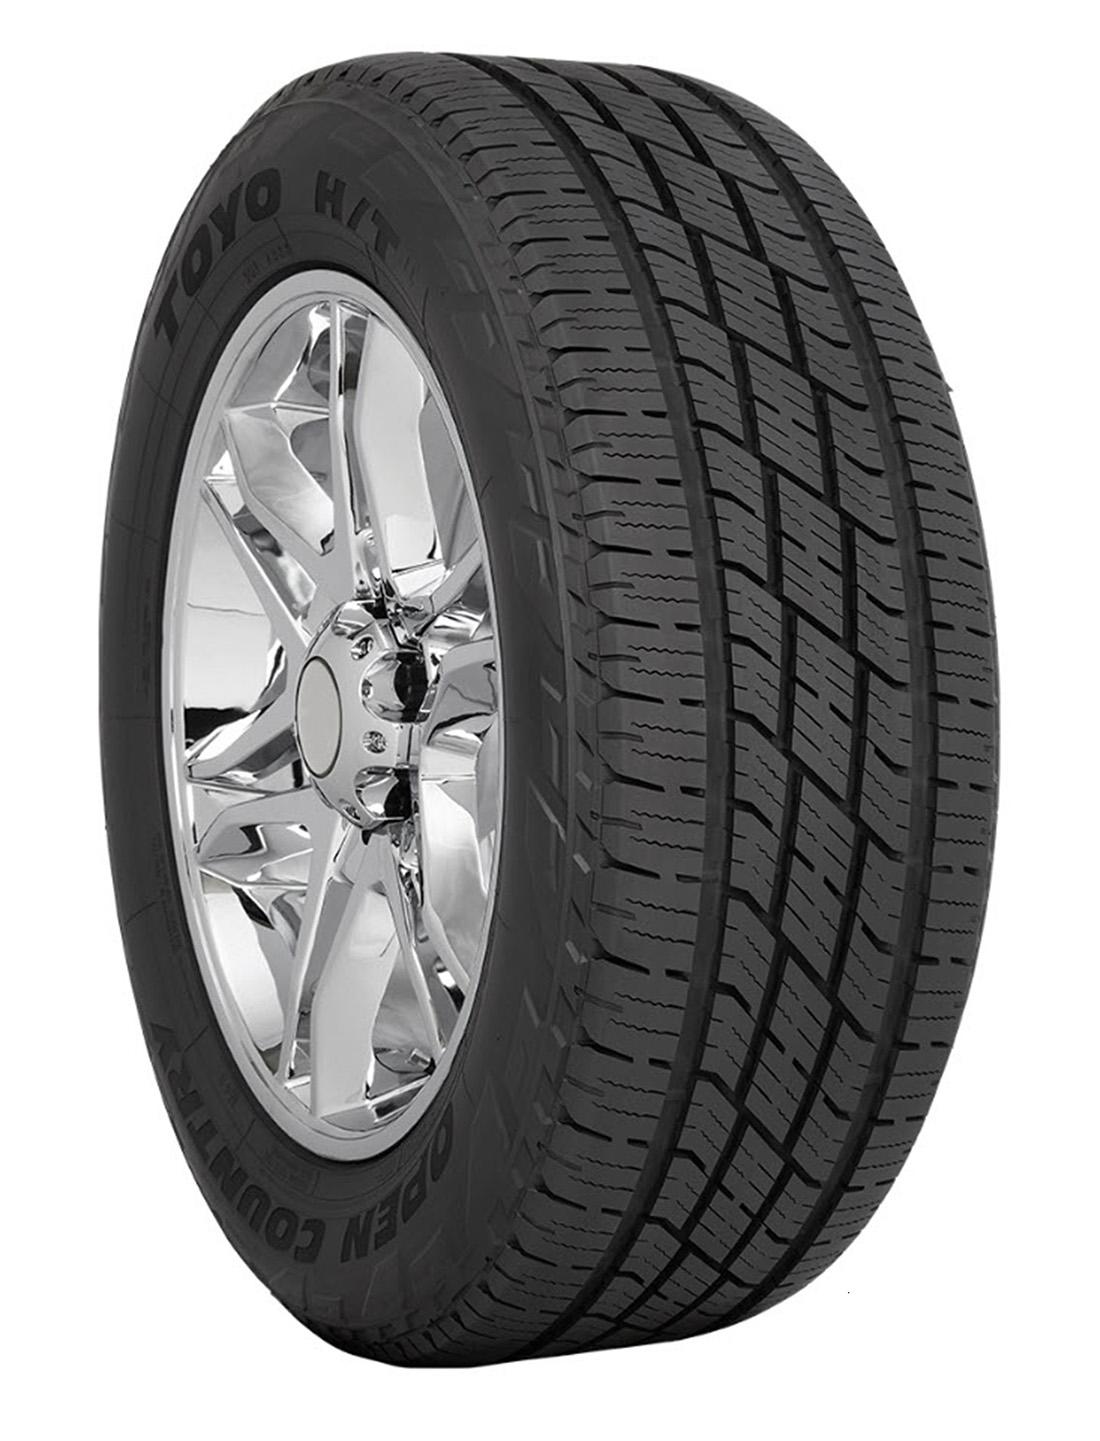 Toyo - PROXES HT  NW  275/45R20